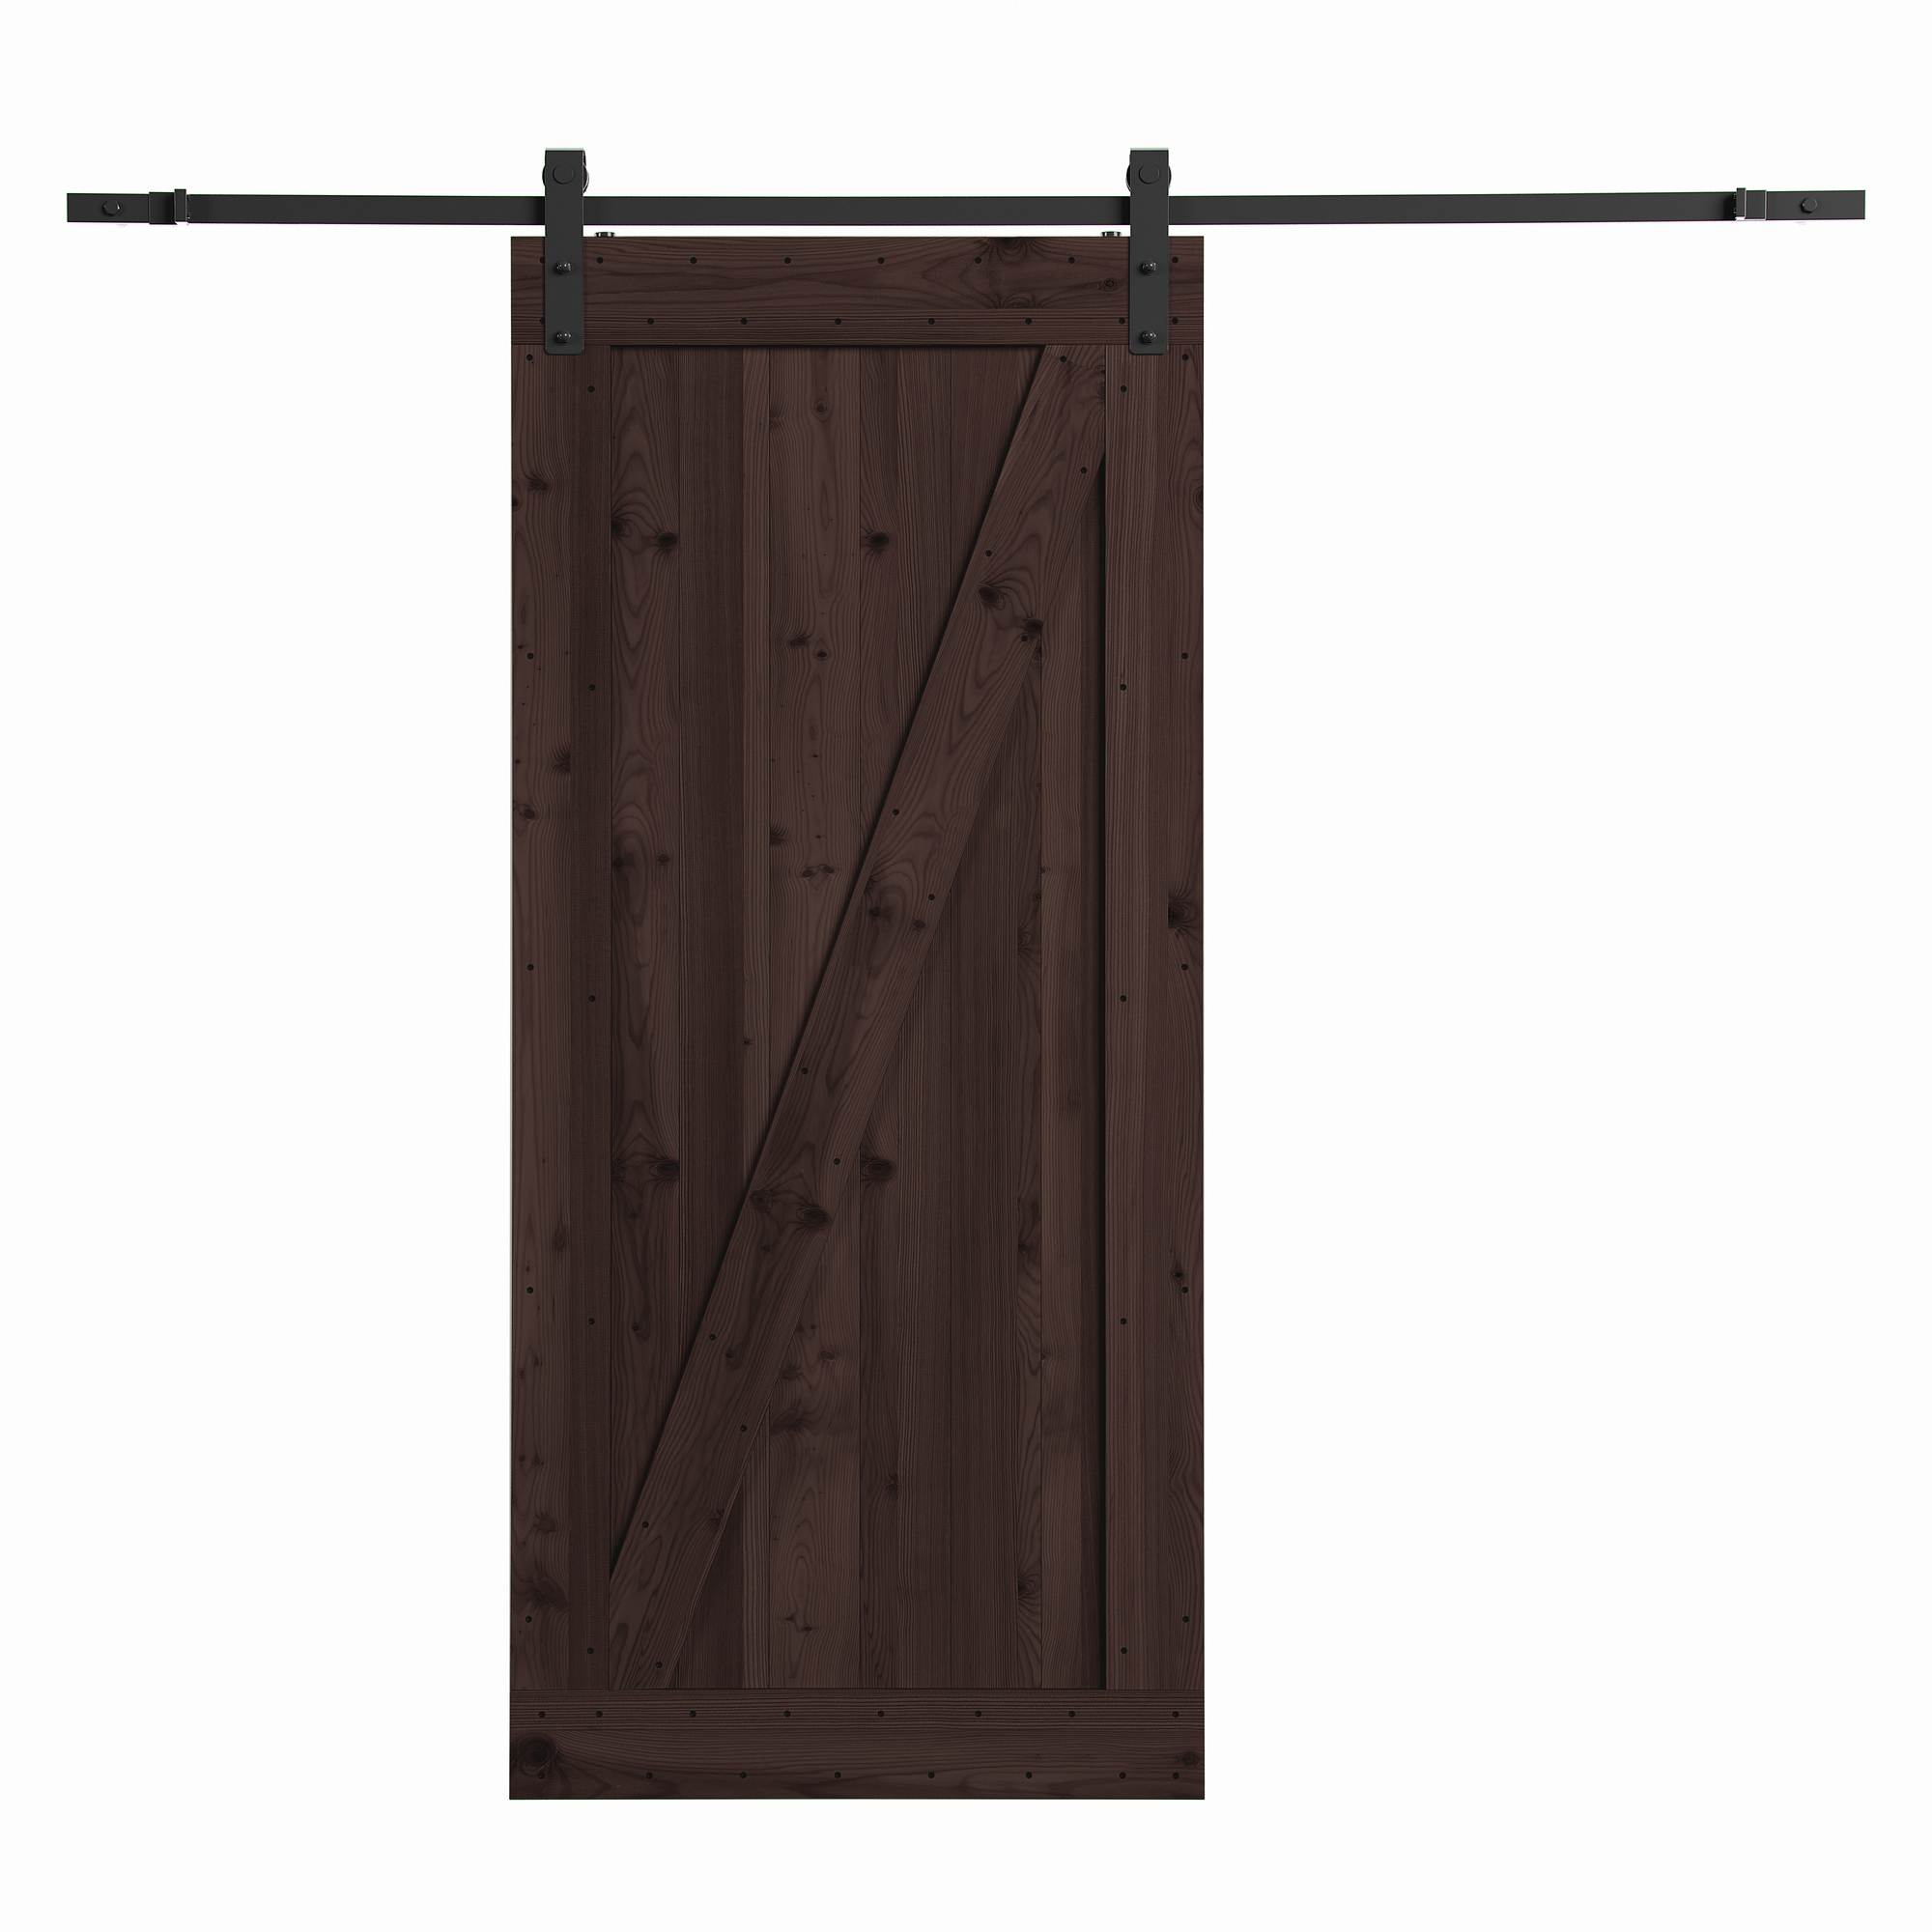 Merry Products, Farm Style Sliding Door, Distressed Smoke Finish, Length 84.06 in, Width 36.02 in, Model COV0022214210